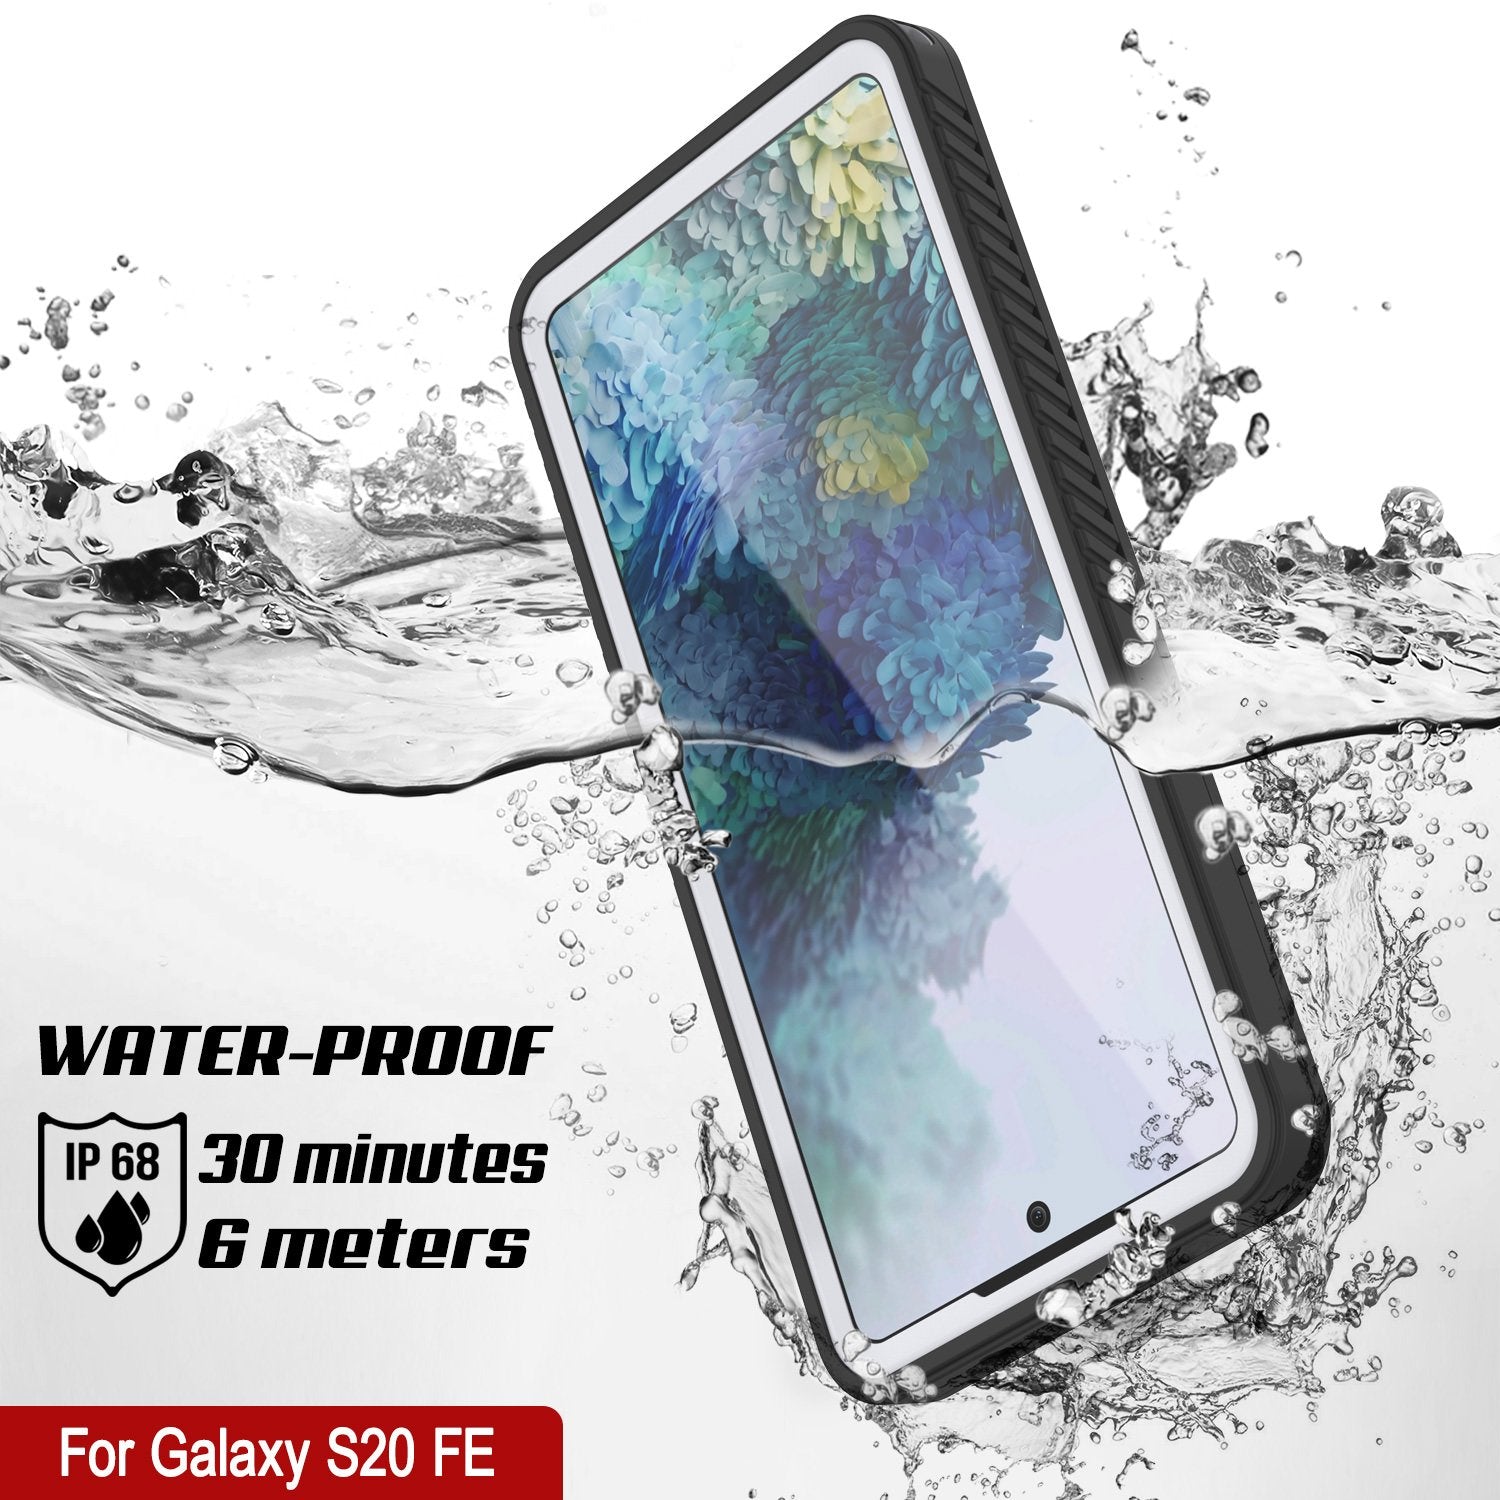 Galaxy S20 FE Water/Shock/Snow/dirt proof [Extreme Series] Punkcase Slim Case [White]